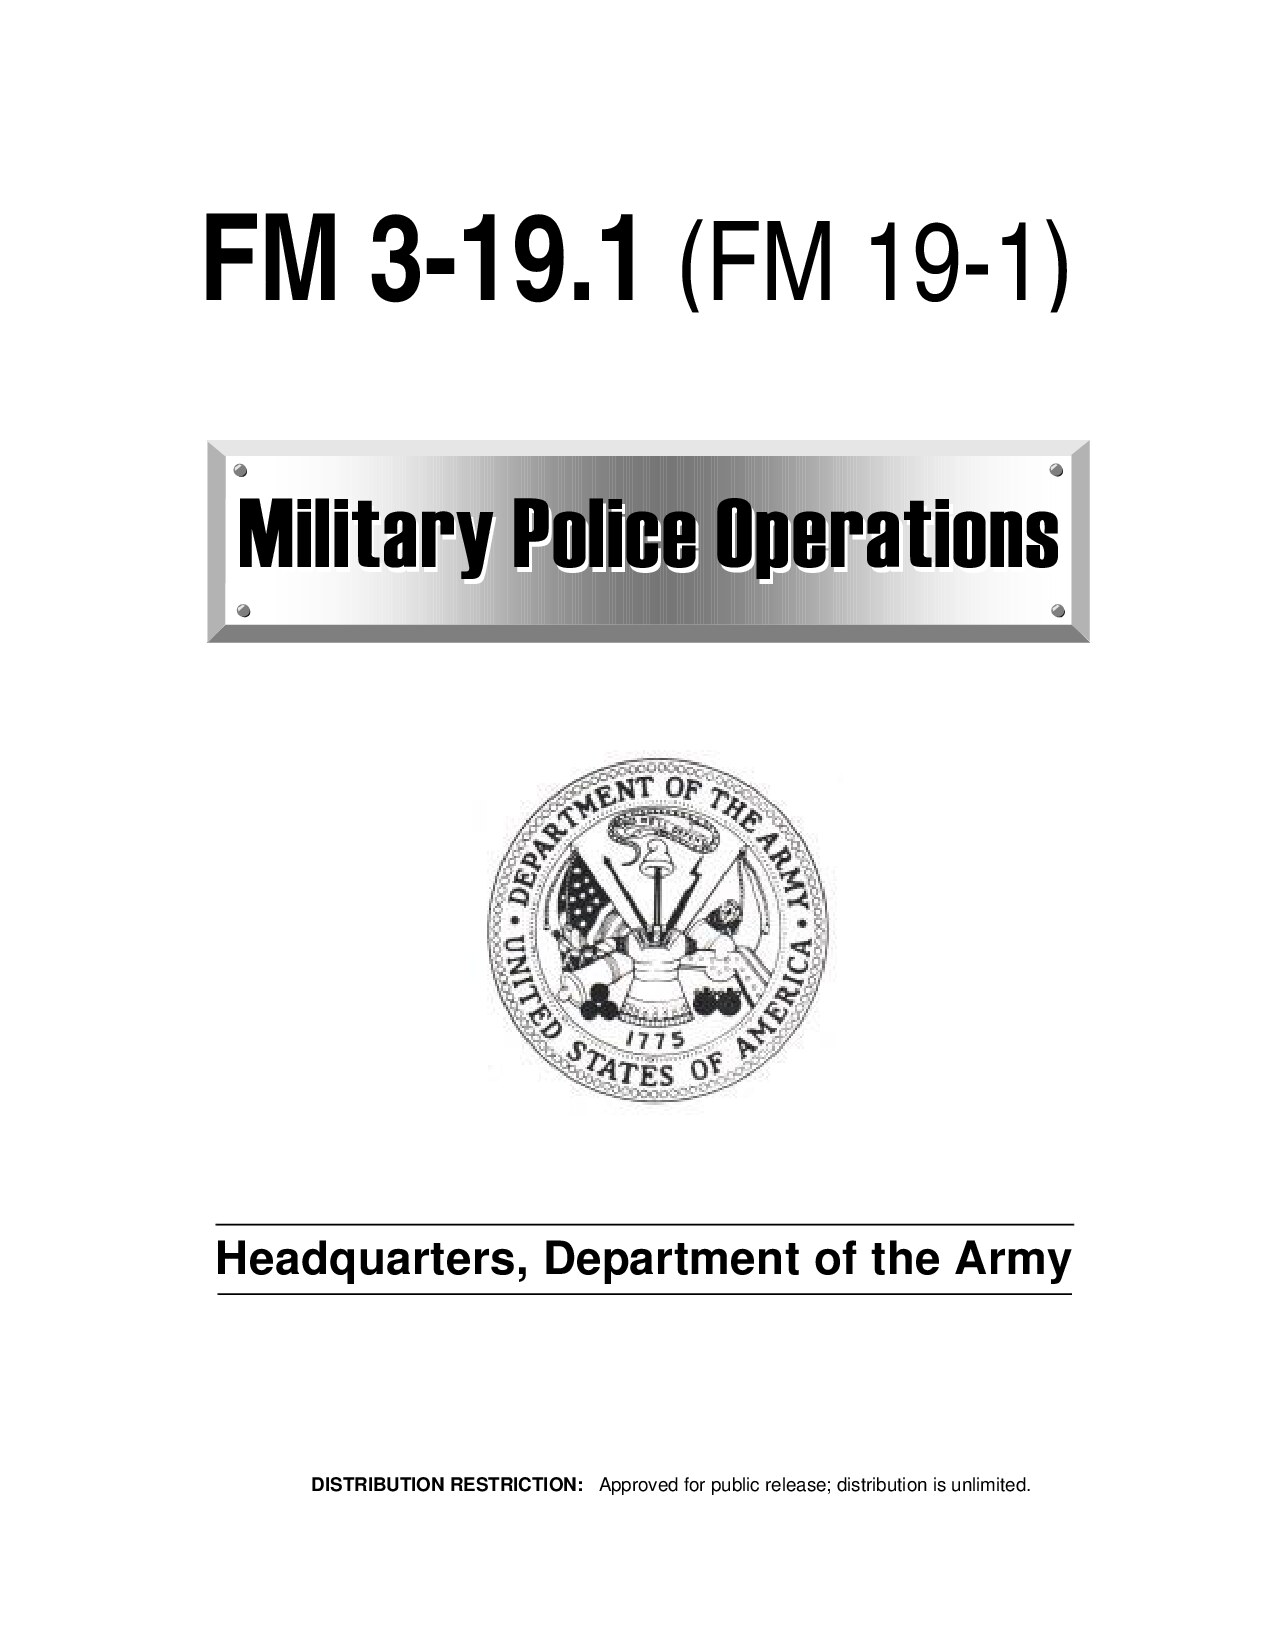 Military Police Operations